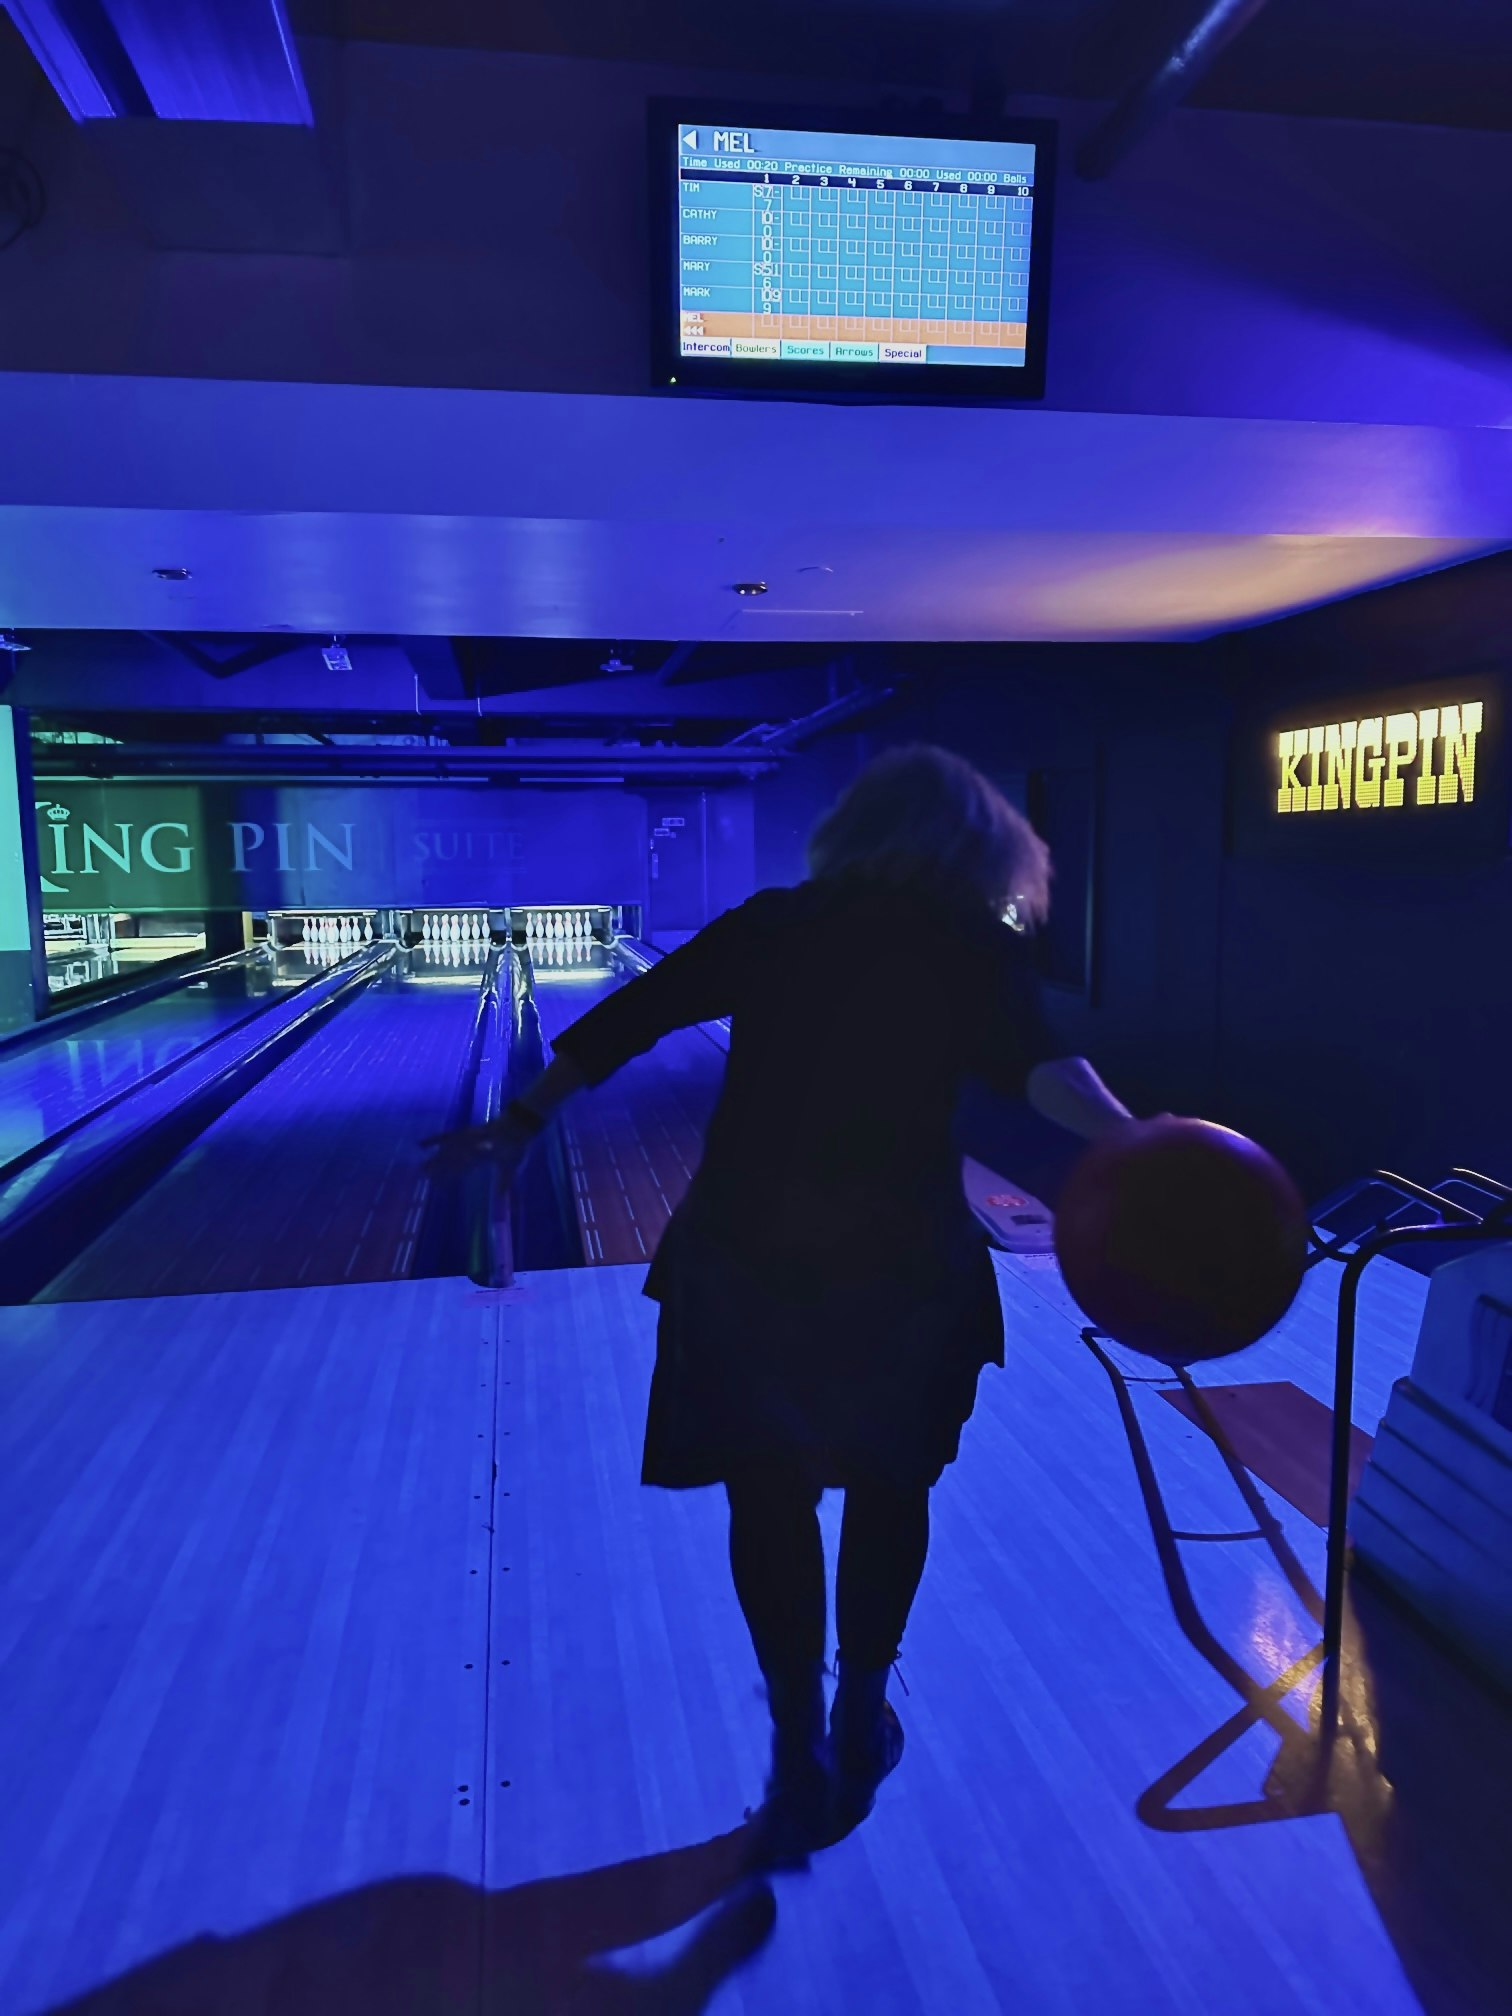 Bloomsbury Bowling Lanes & The Kingpin Suite - The KingPin Suite image 8